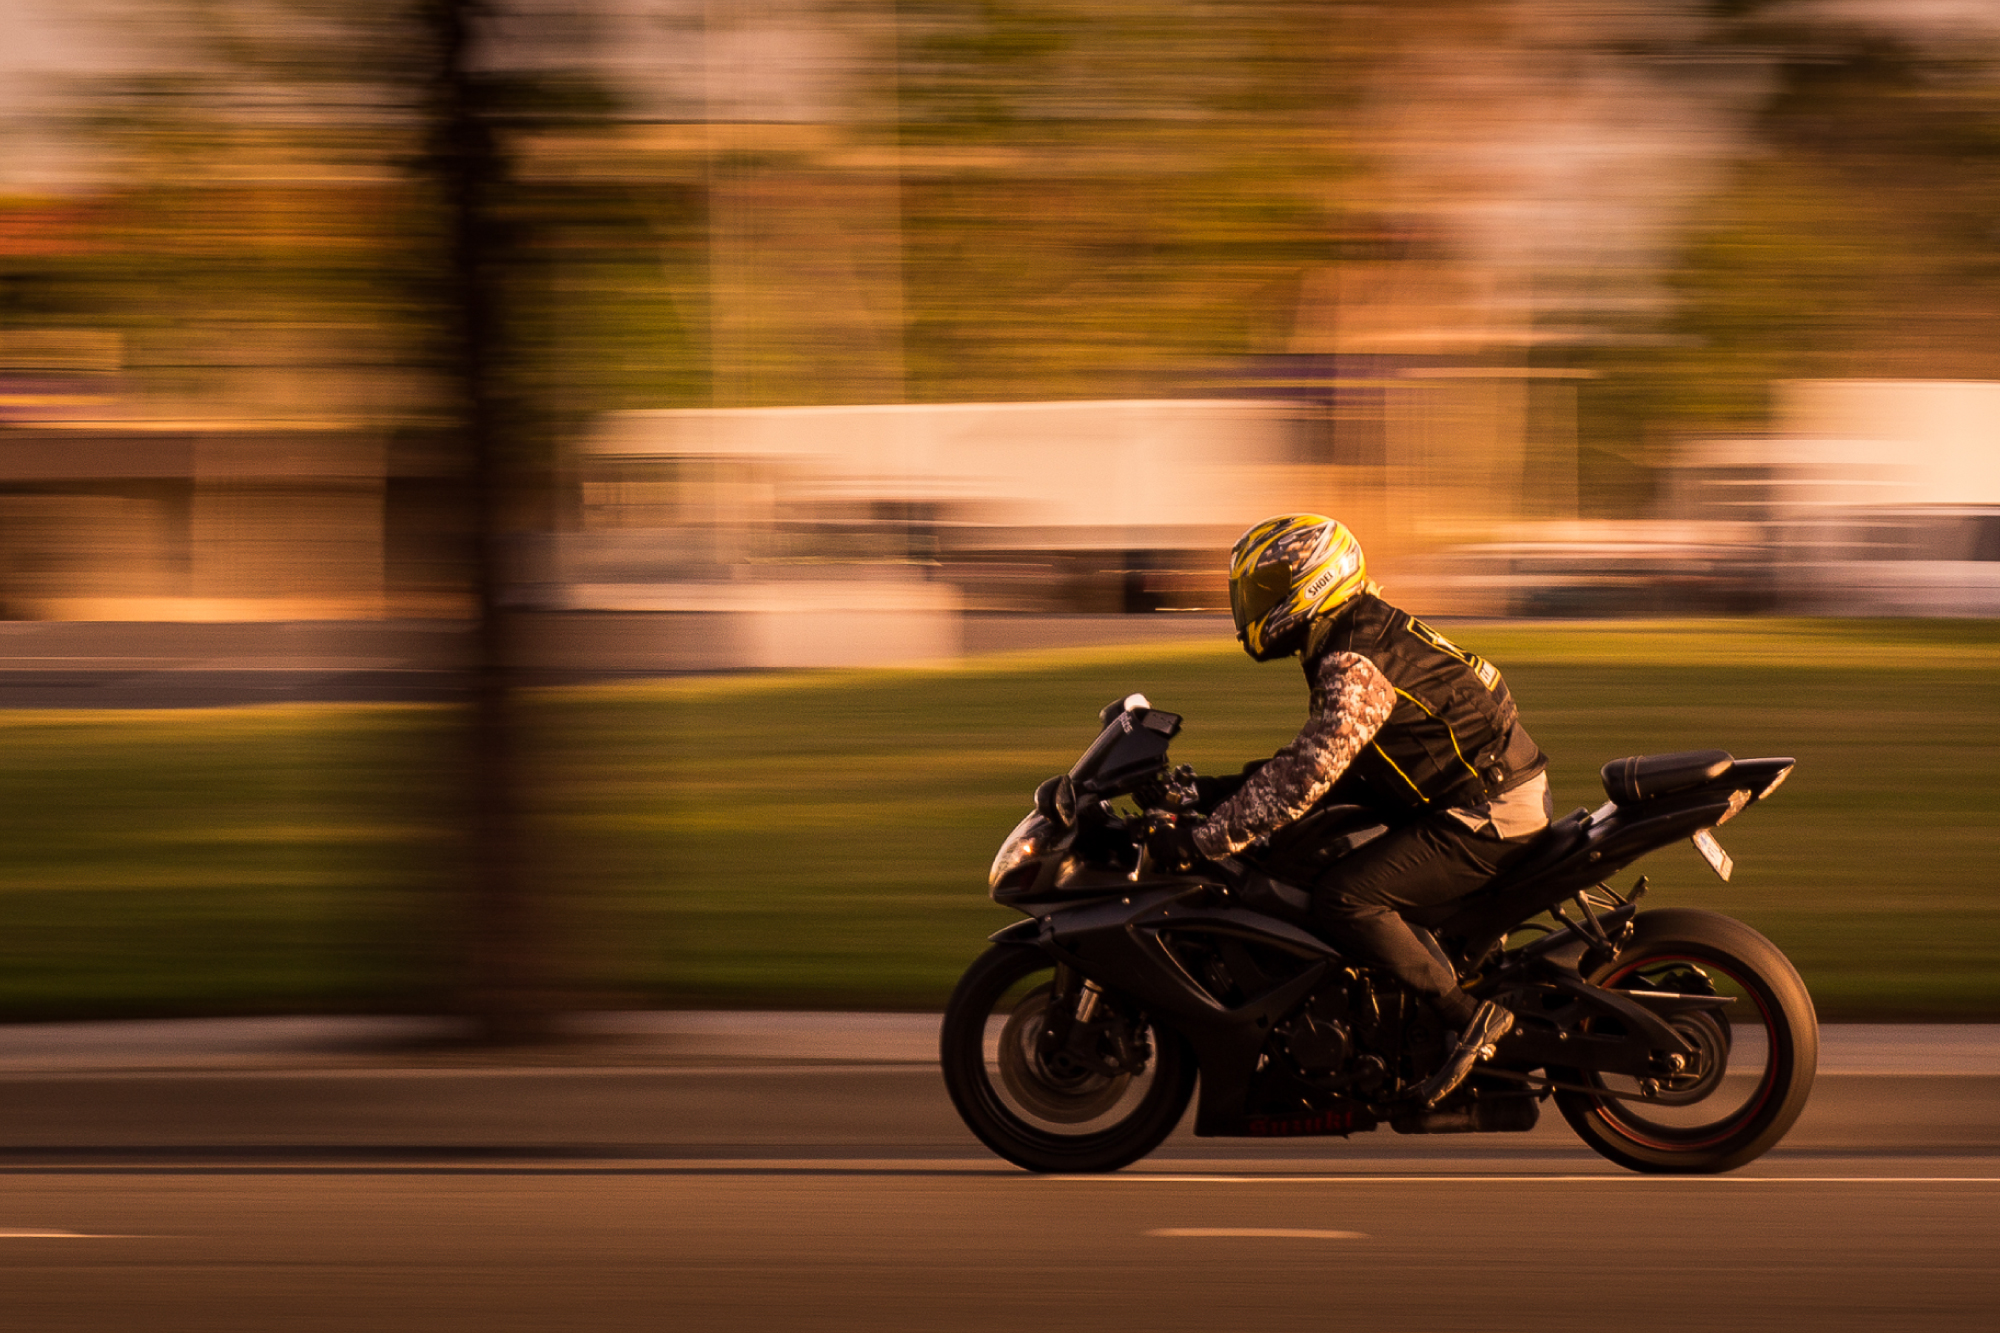 Photography 101: How to Hold a Camera and Panning Tutorial